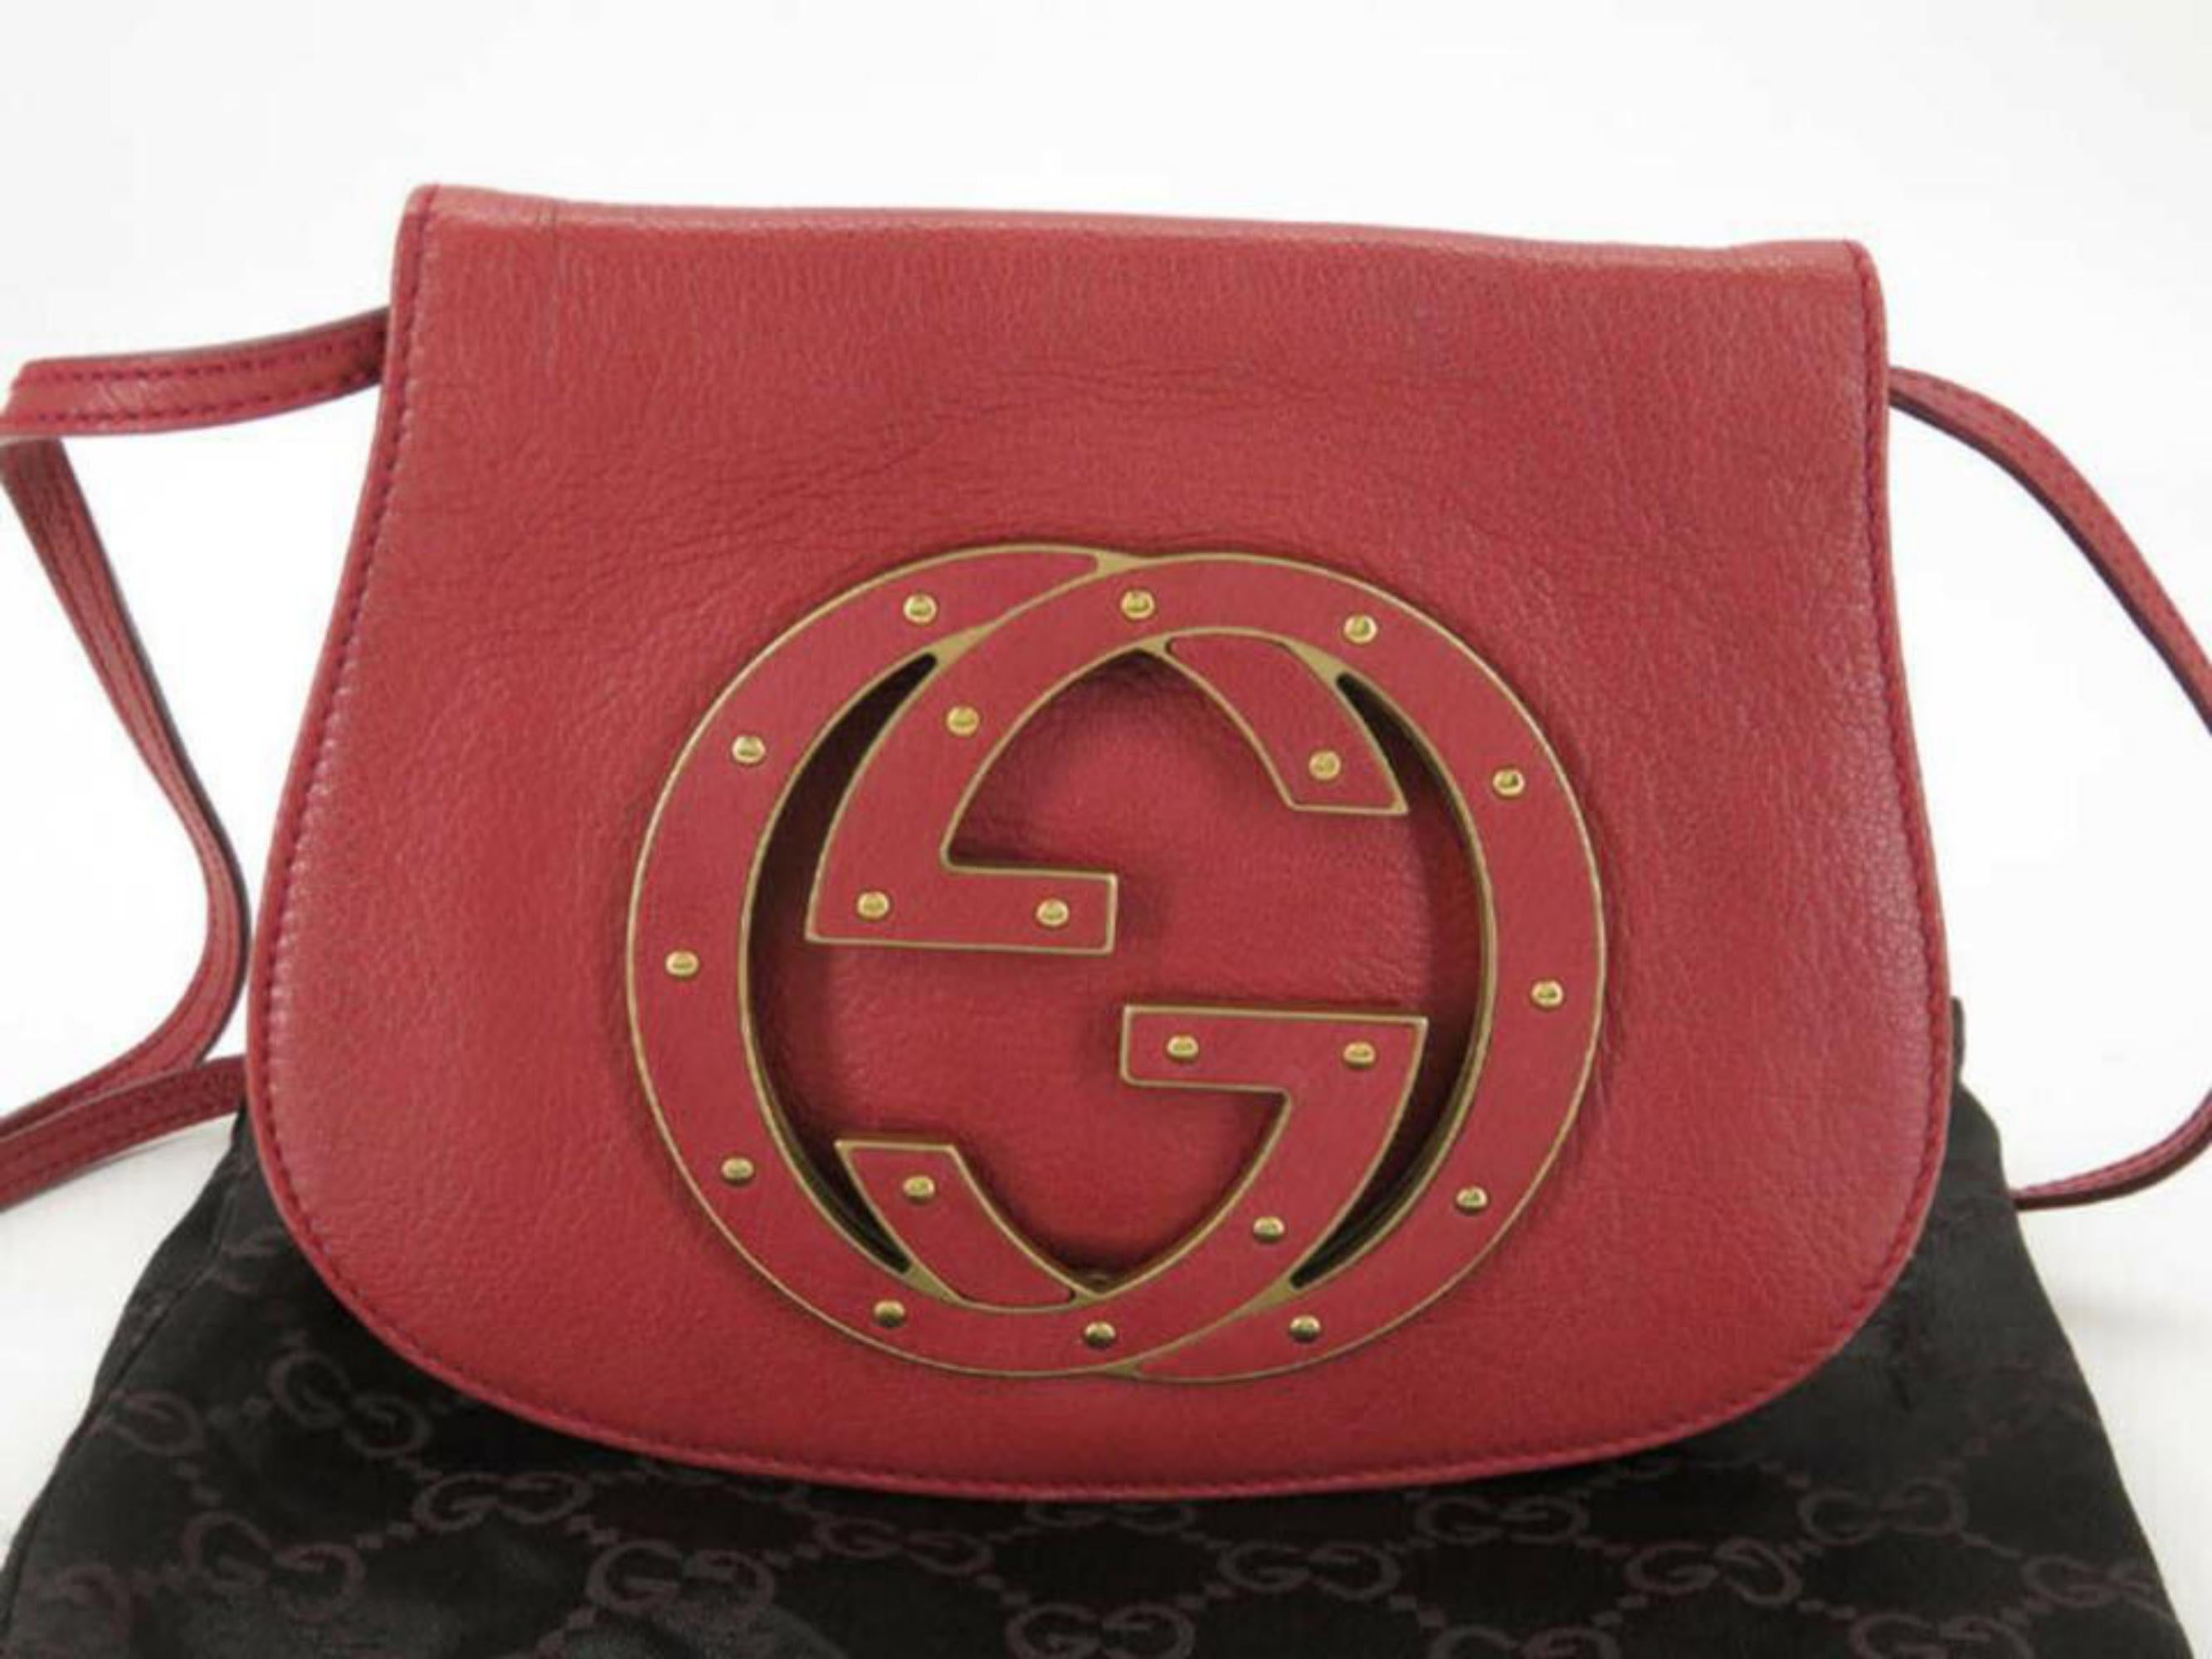 Gucci Soho Studded Messenger 870420 Red Leather Cross Body Bag For Sale 6